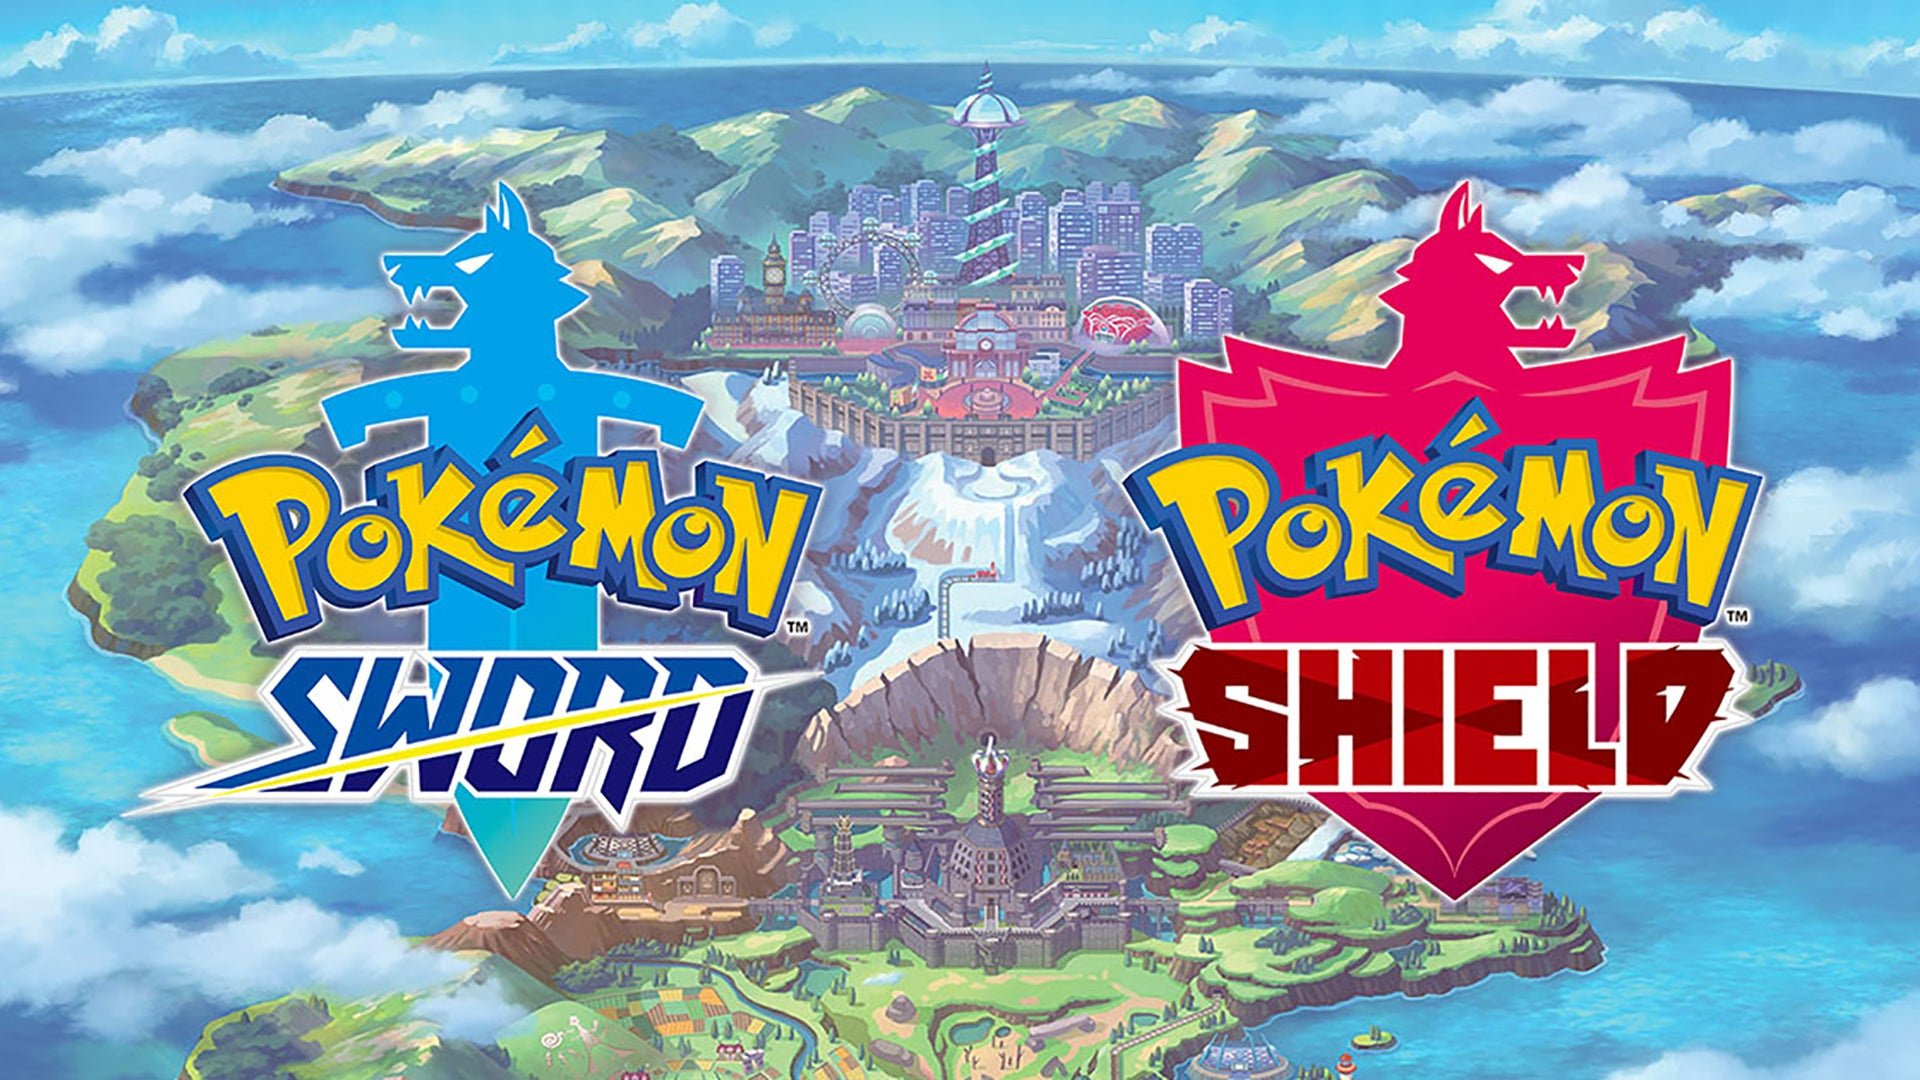 Poll: Pokémon Sword And Shield Launched A Year Ago, Has Your Opinion On ...